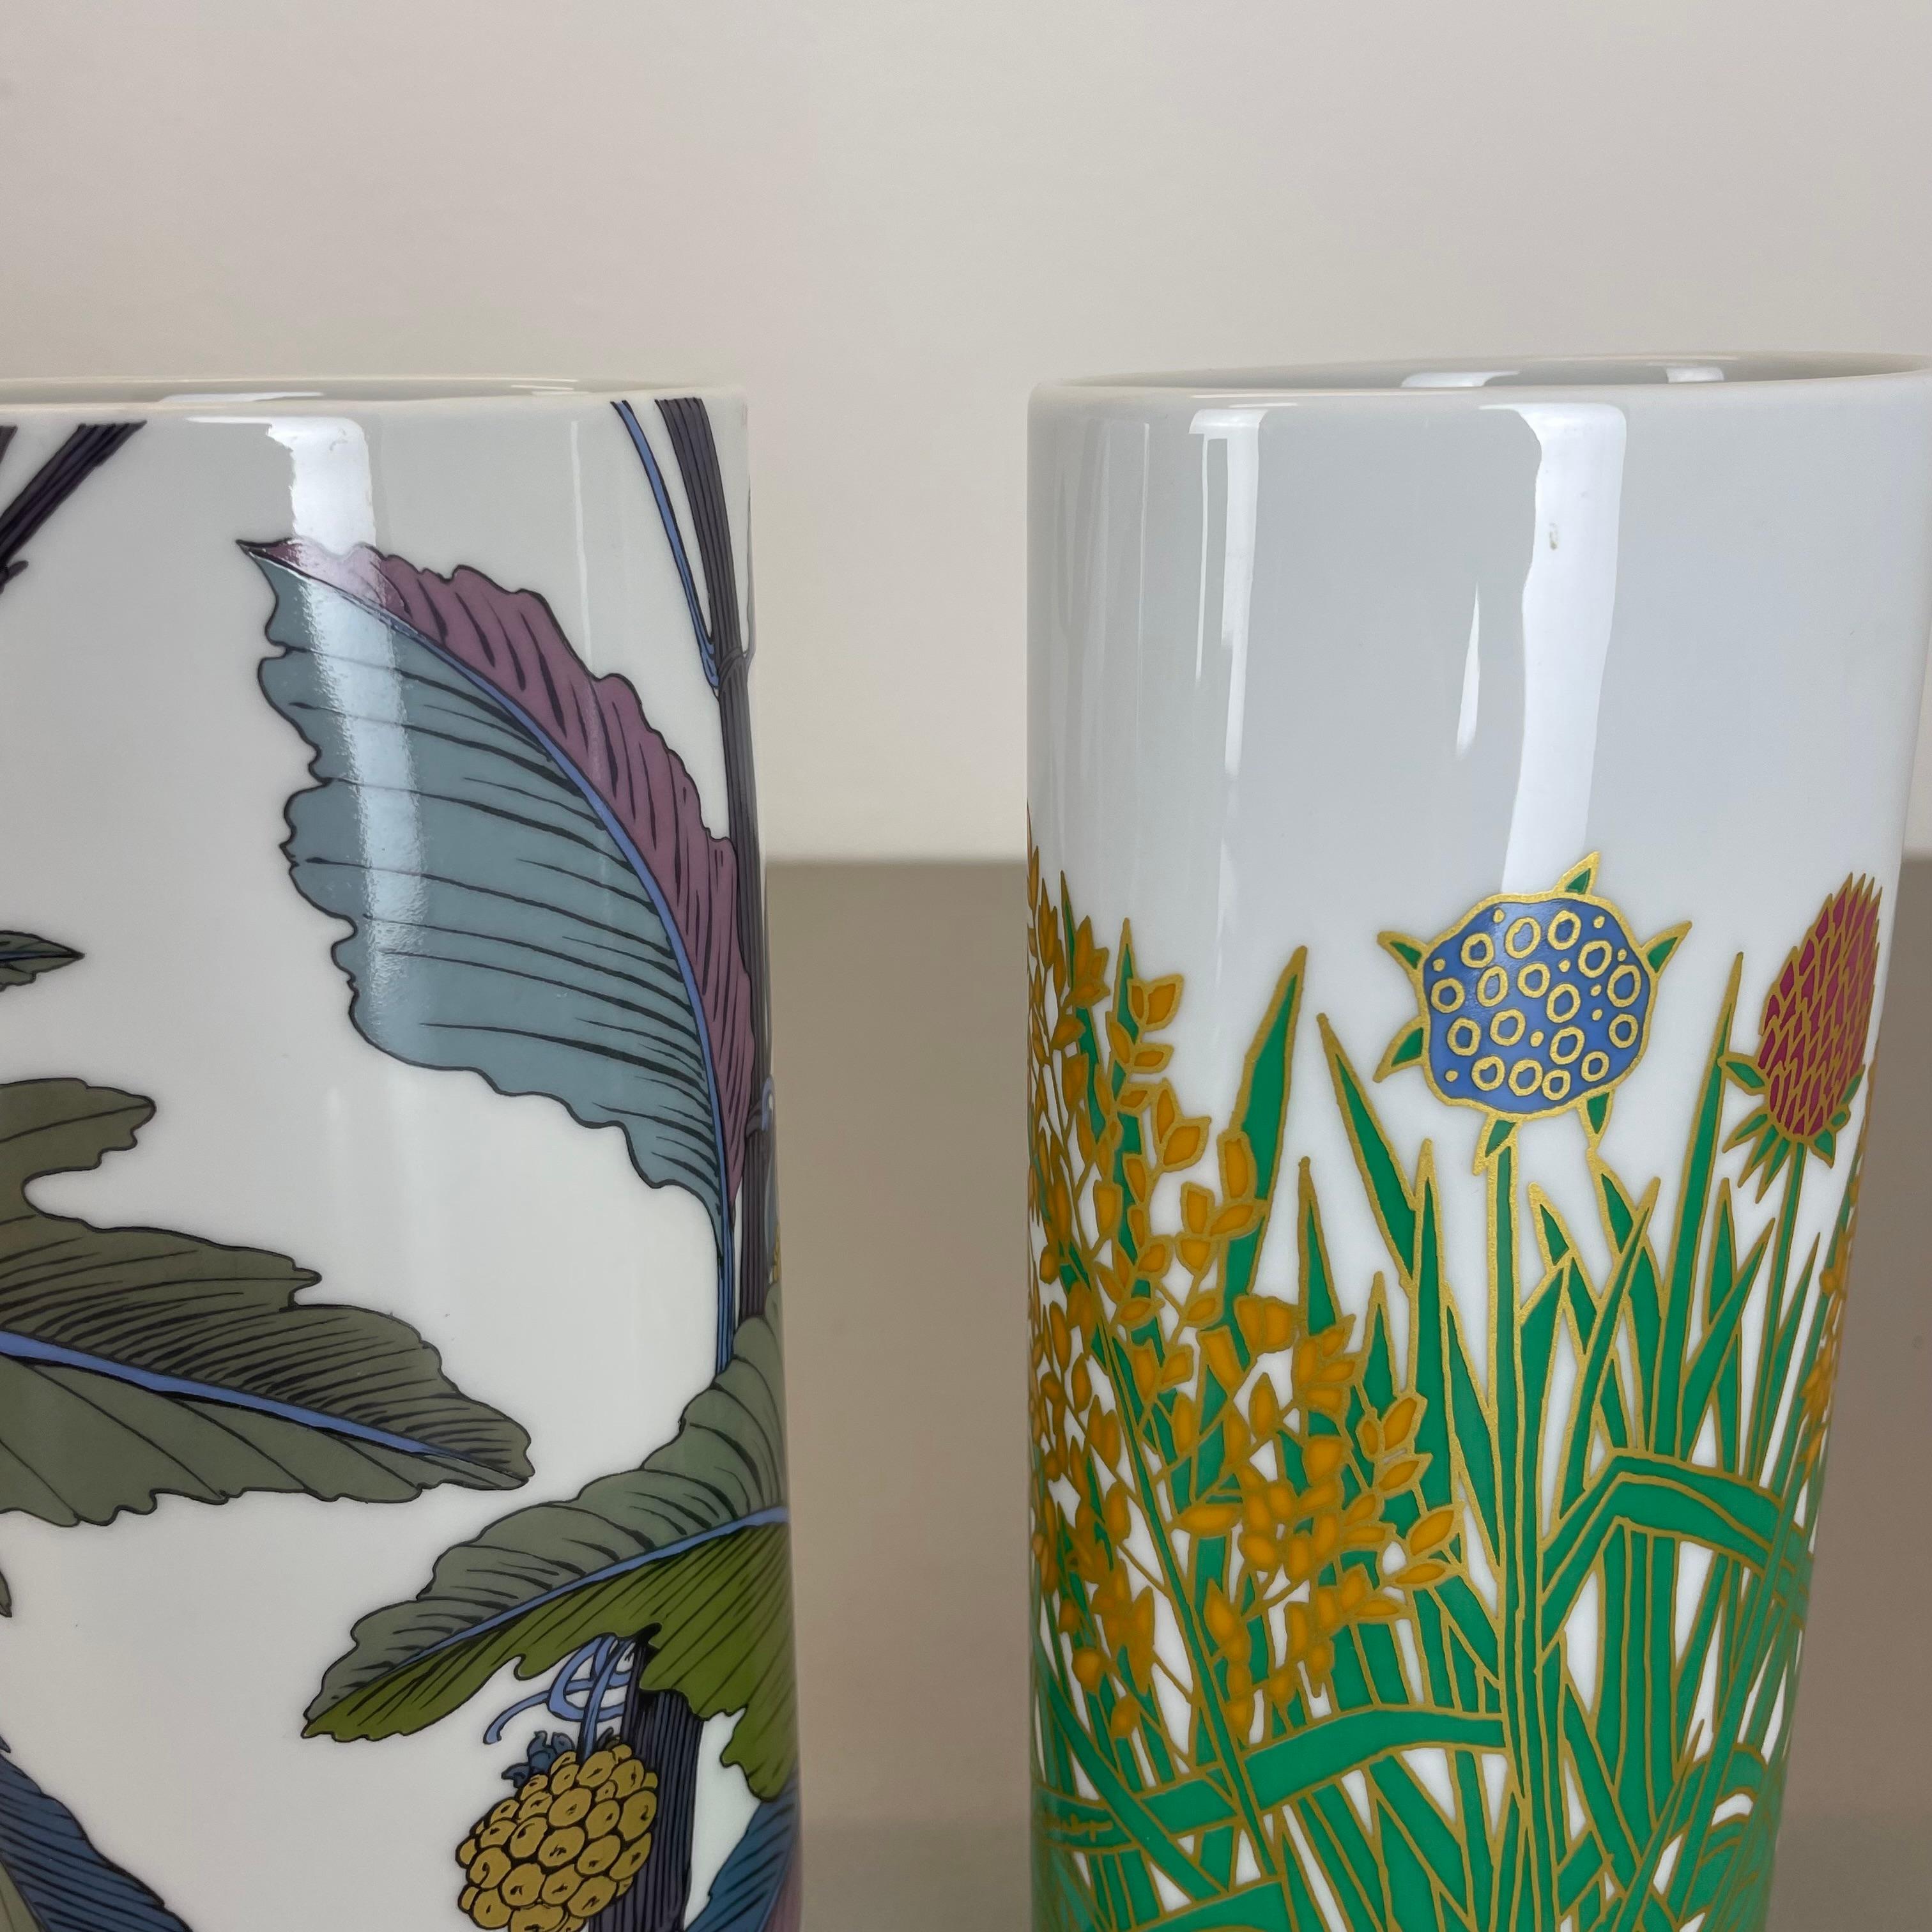 Set of 2 Floral Vases by W. Bauer and A. Le Foll for Rosenthal, Germany, 1980s For Sale 8